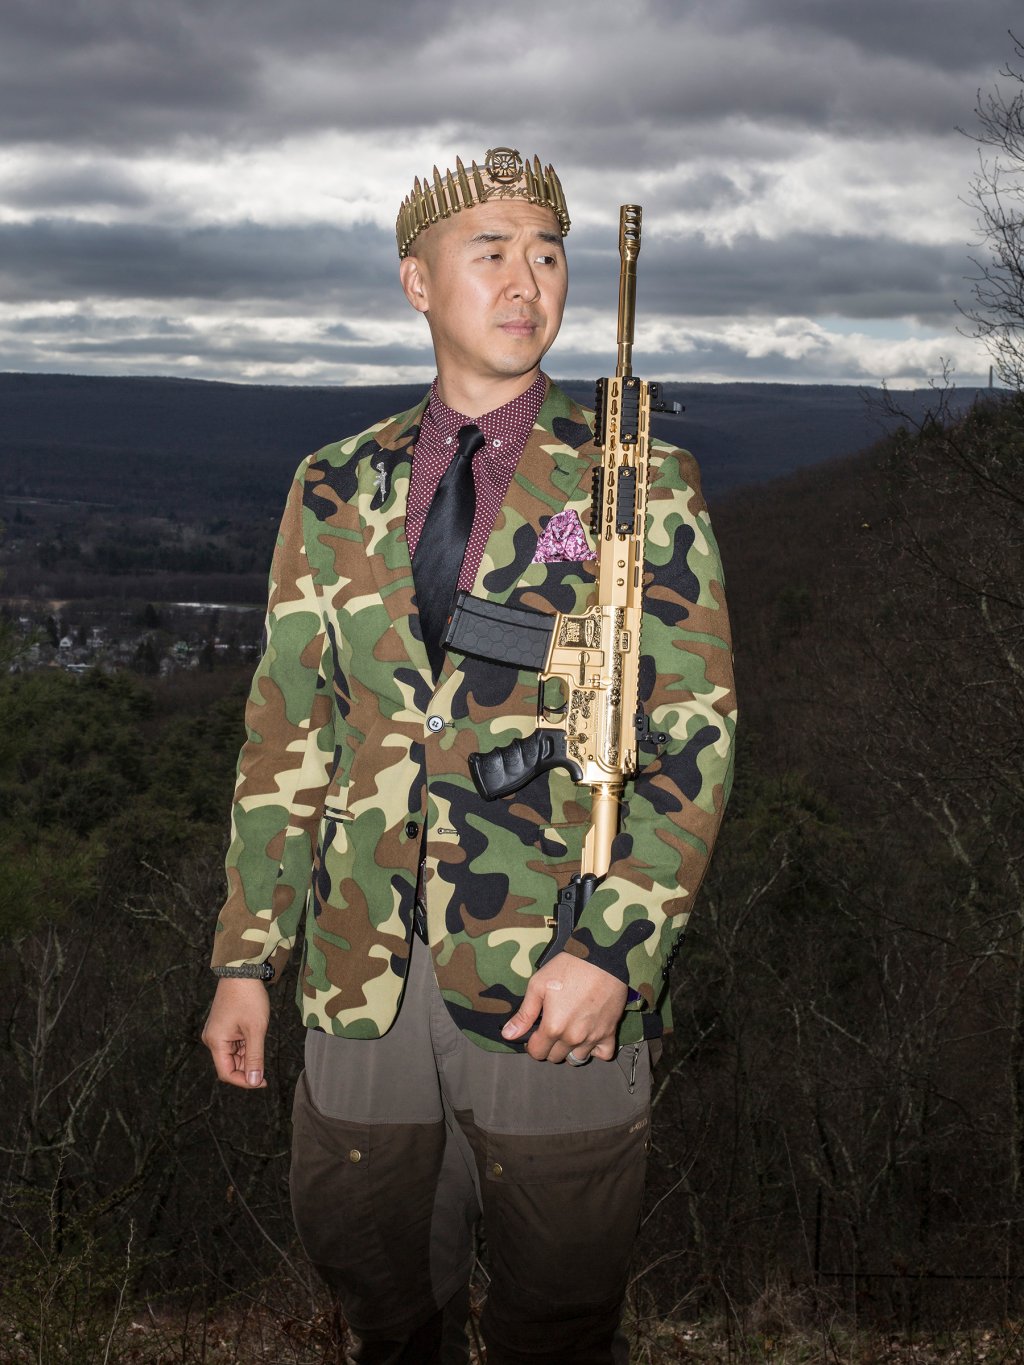 Reverend Hyung Jin "Sean" Moon poses for a portrait with his gold AR-15 "rod of iron" at Moon's home in Matamoras, Penn., on April 26, 2018.